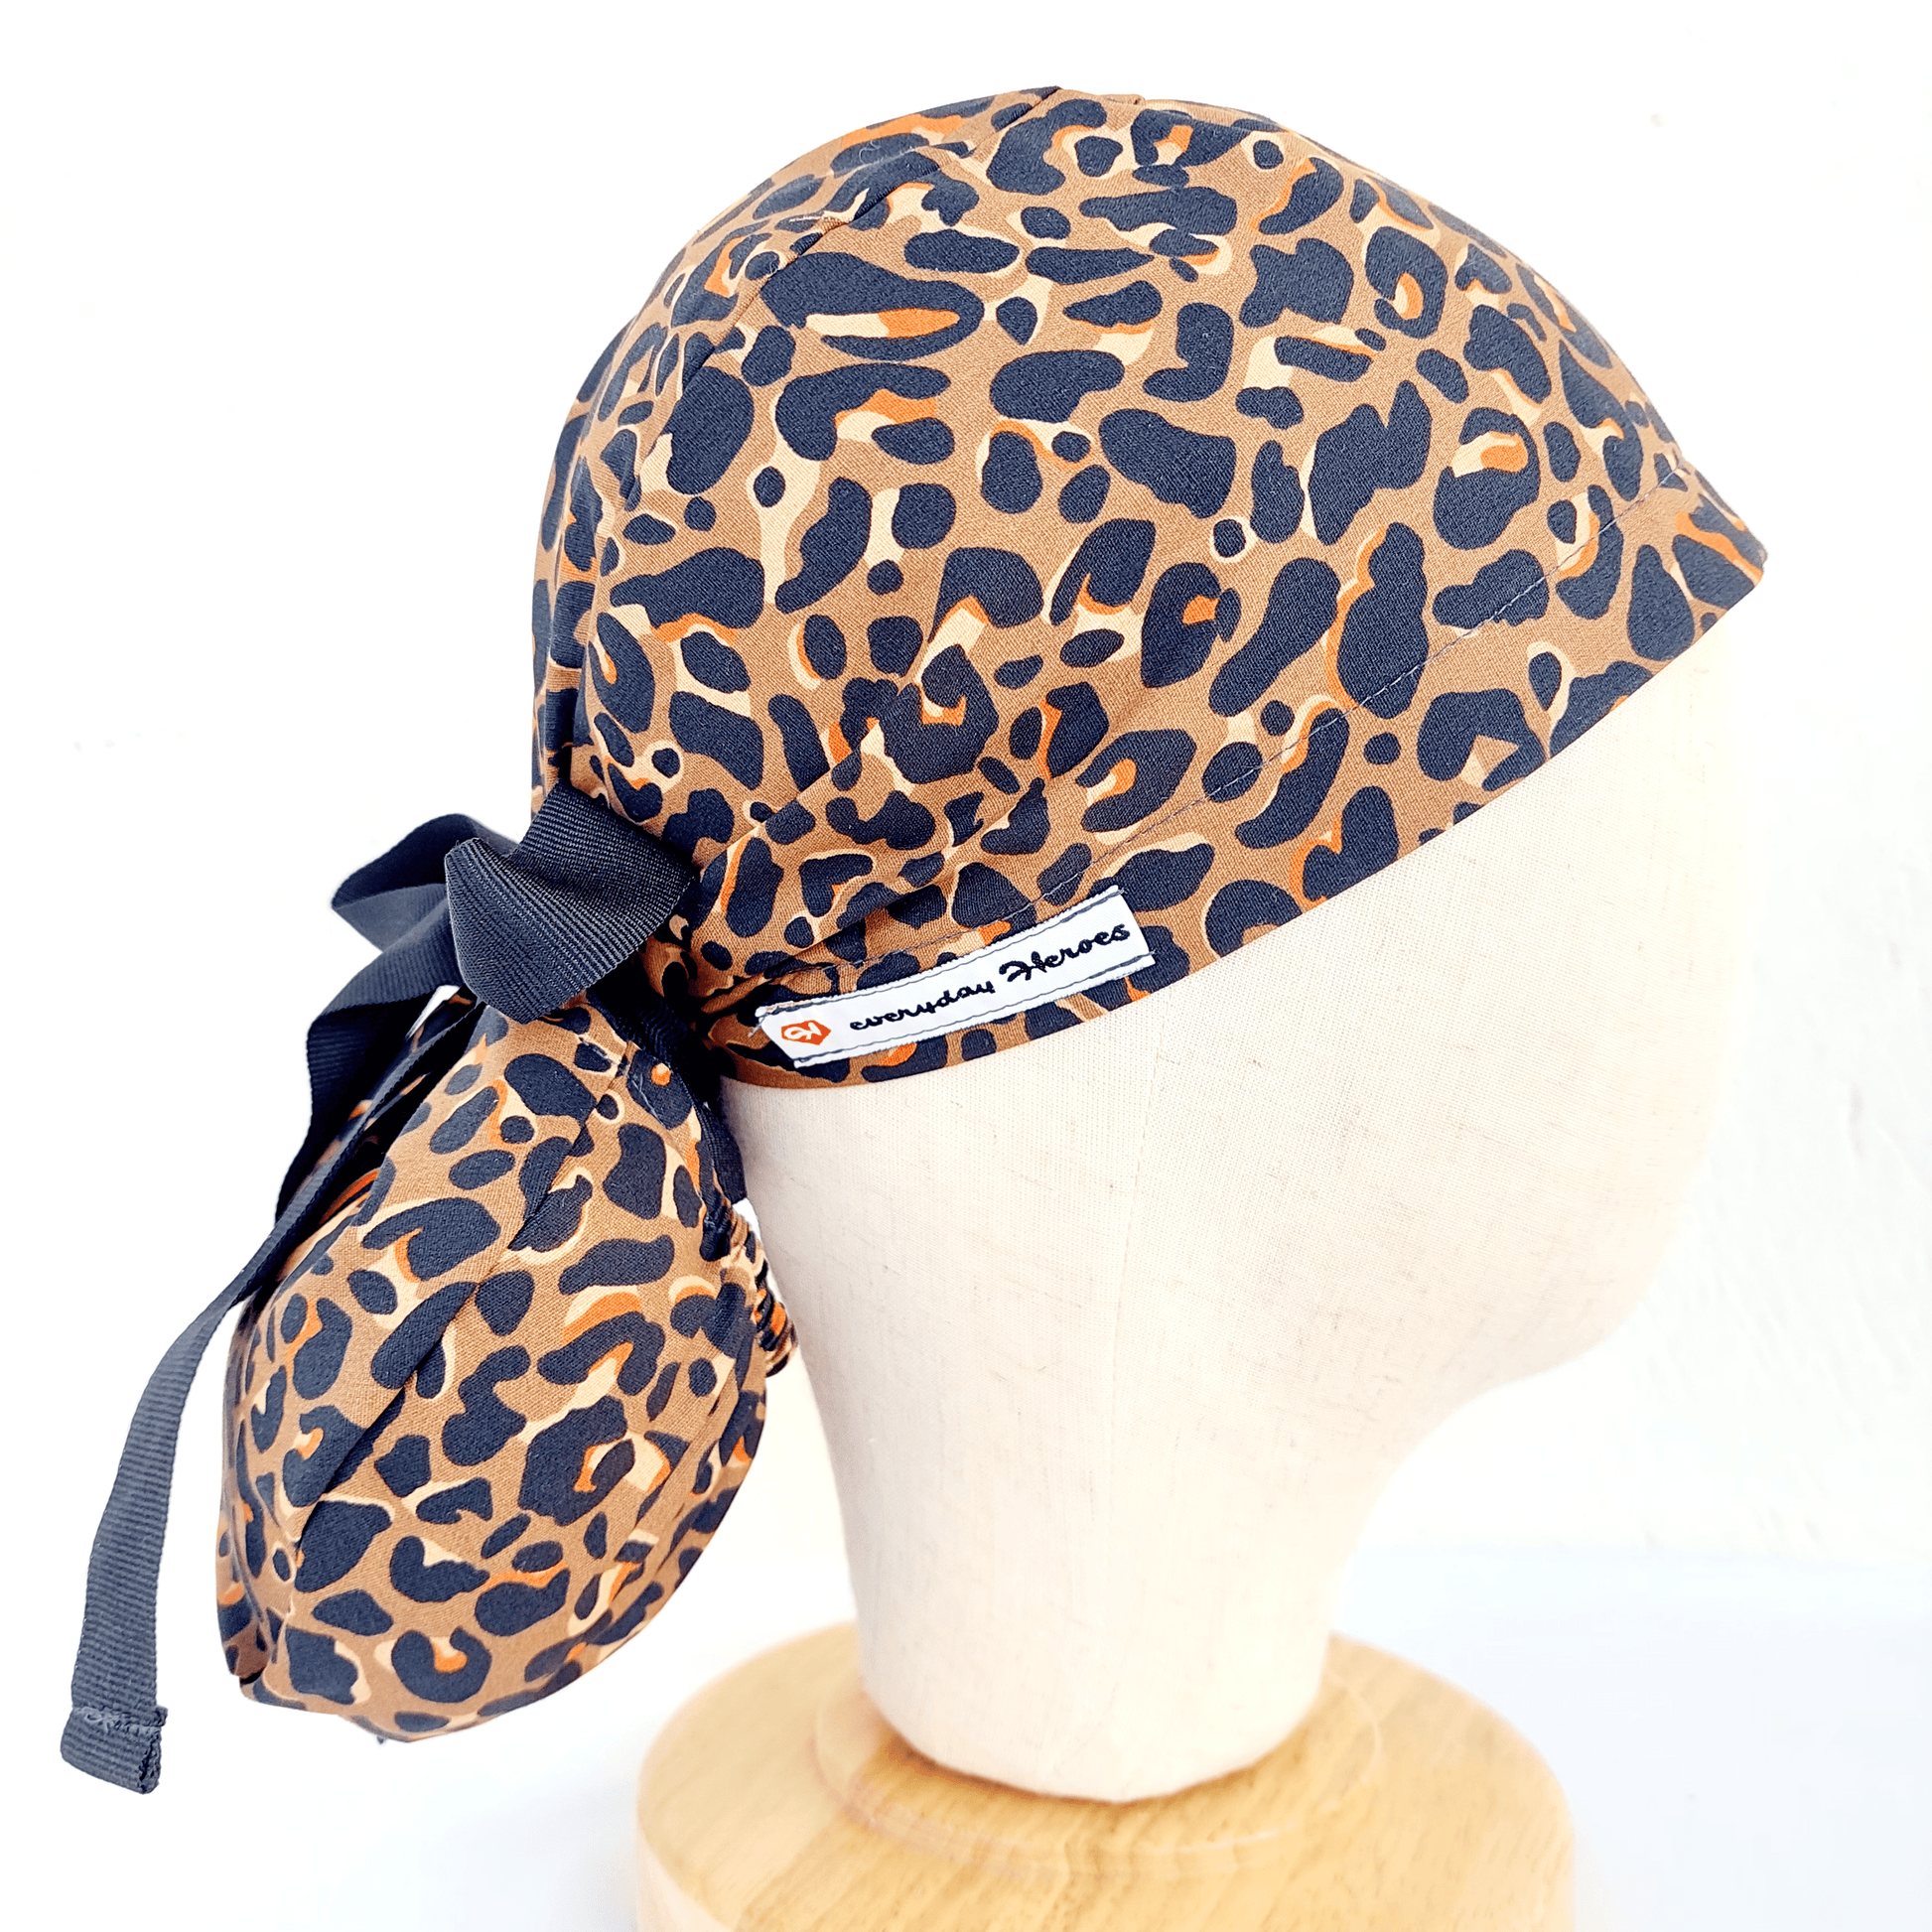 Surgical Ponytail Scrub Cap in Classic Leopard